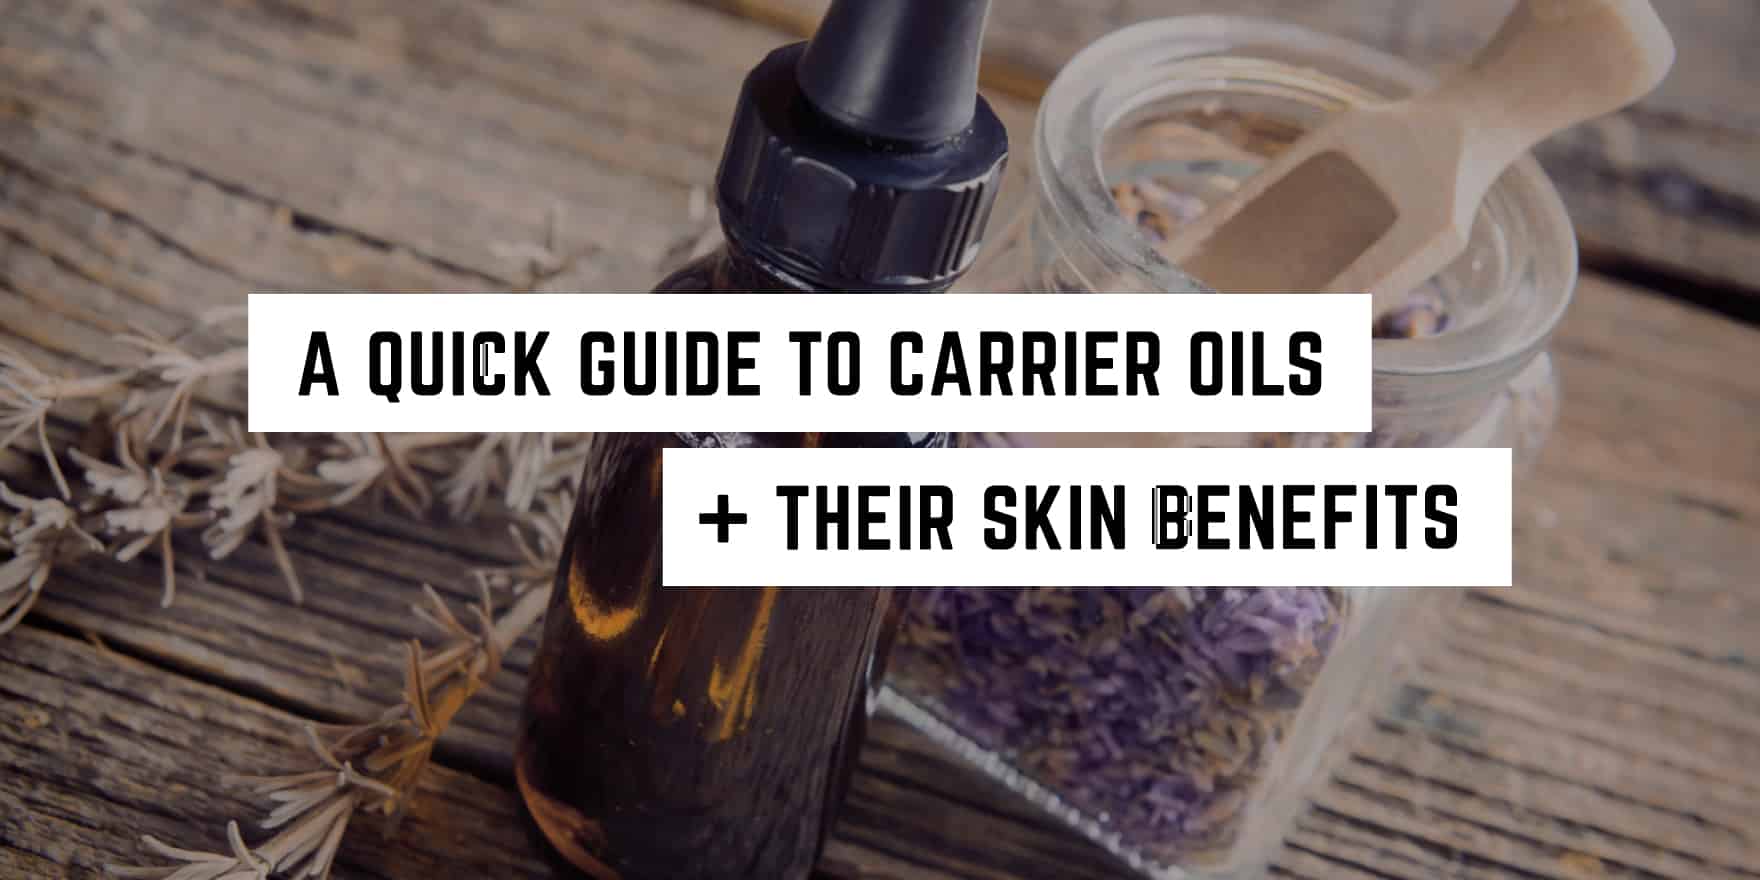 A Quick Guide to Carrier Oils and their Benefits